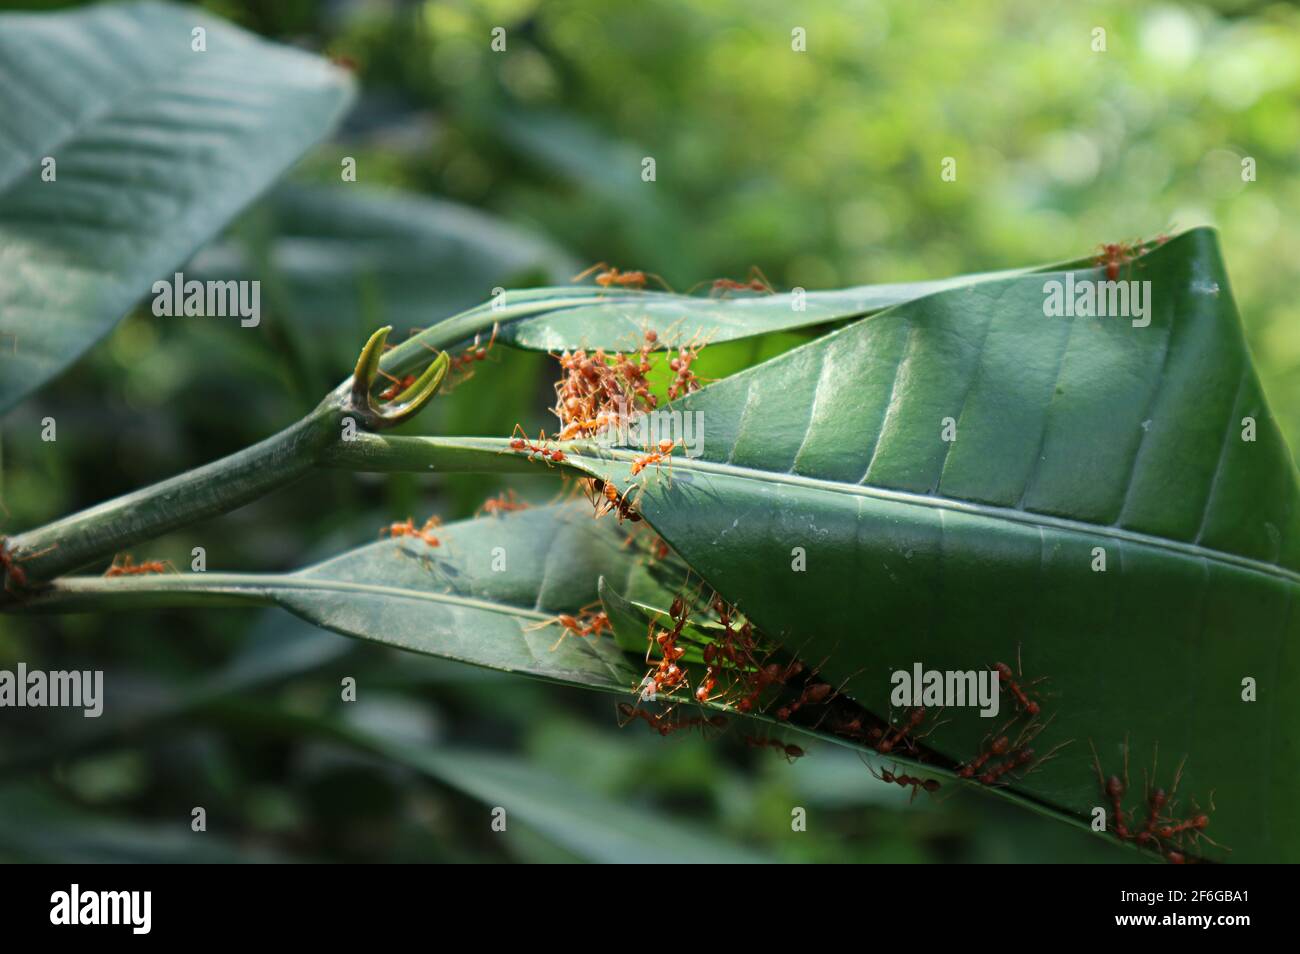 Close up of a fire ants' nest made from folded large leaves Stock Photo